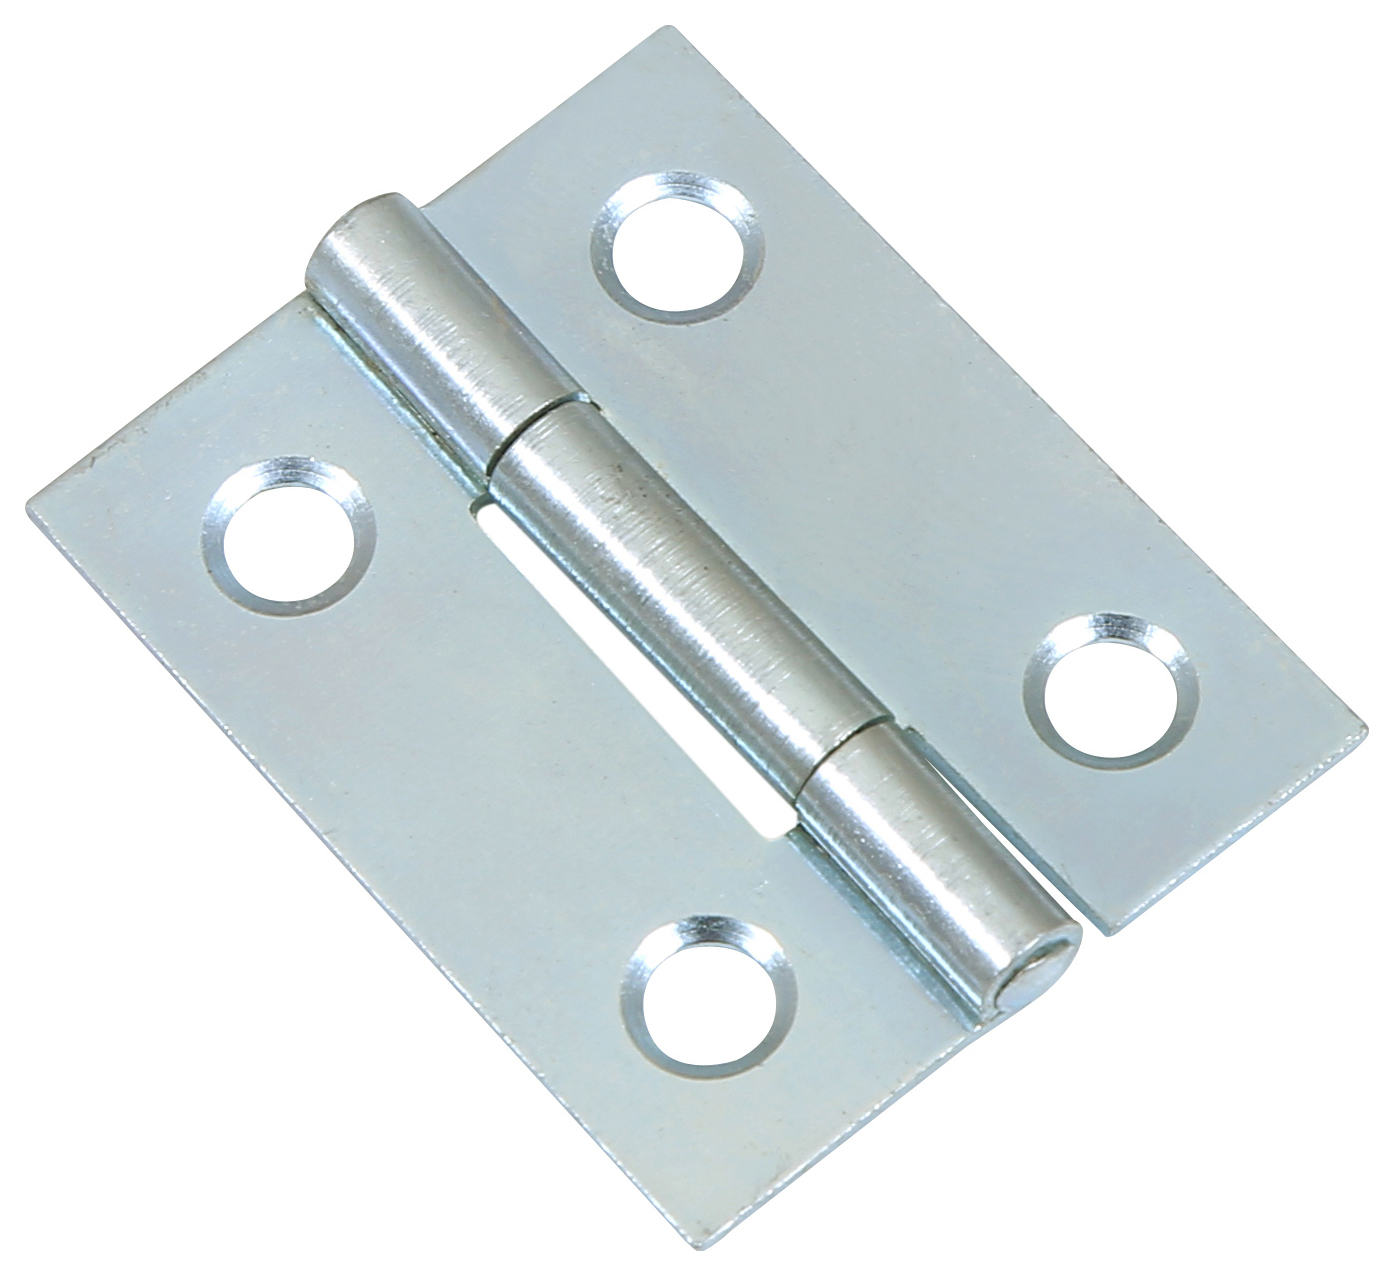 Butt Hinge Zinc Plated 38mm - Pack of 2